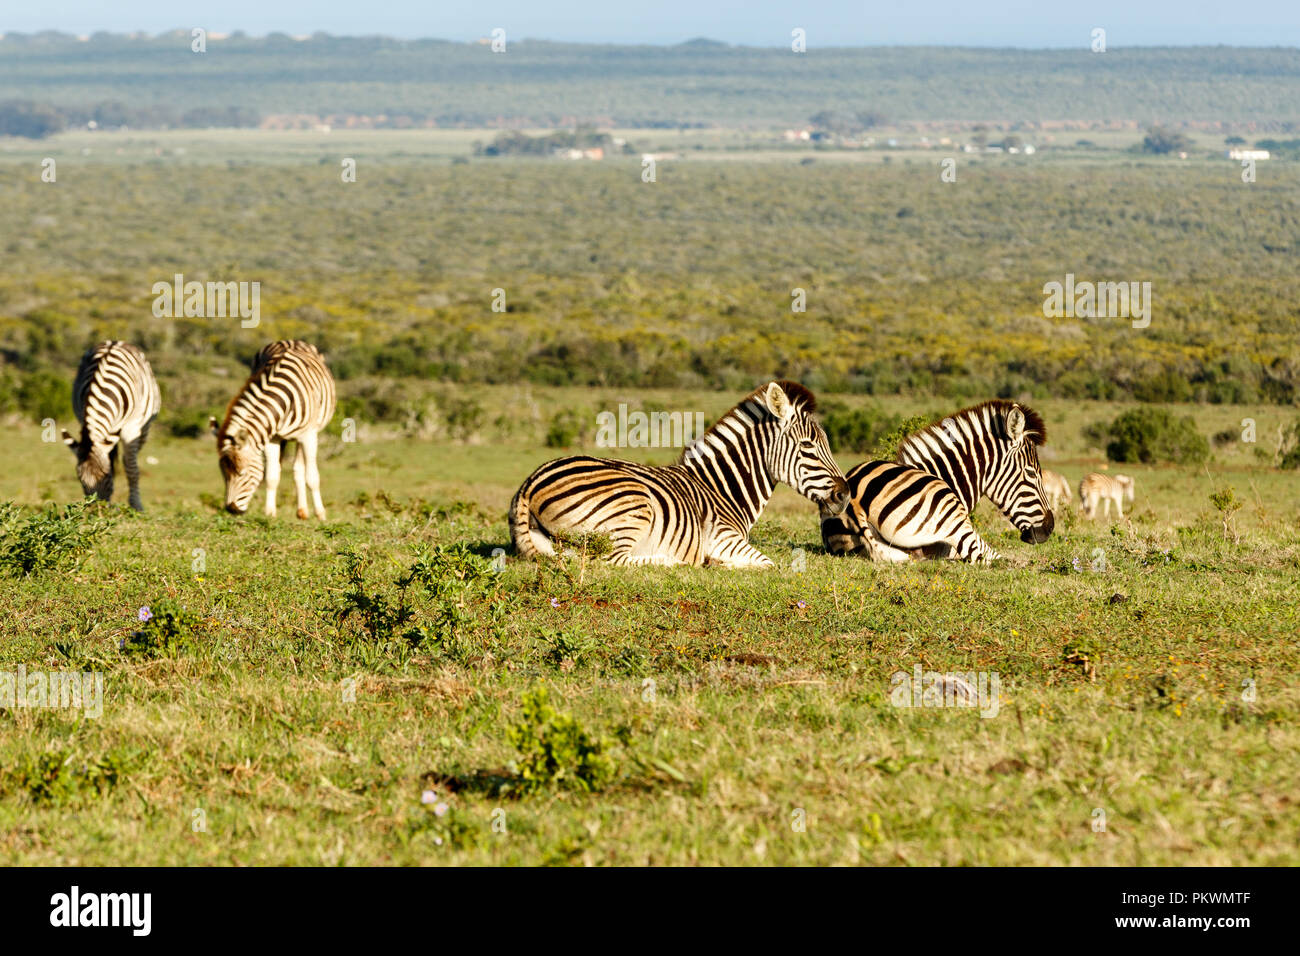 Group of Zebras lying, while the other is standing and eating grass in the field. Stock Photo